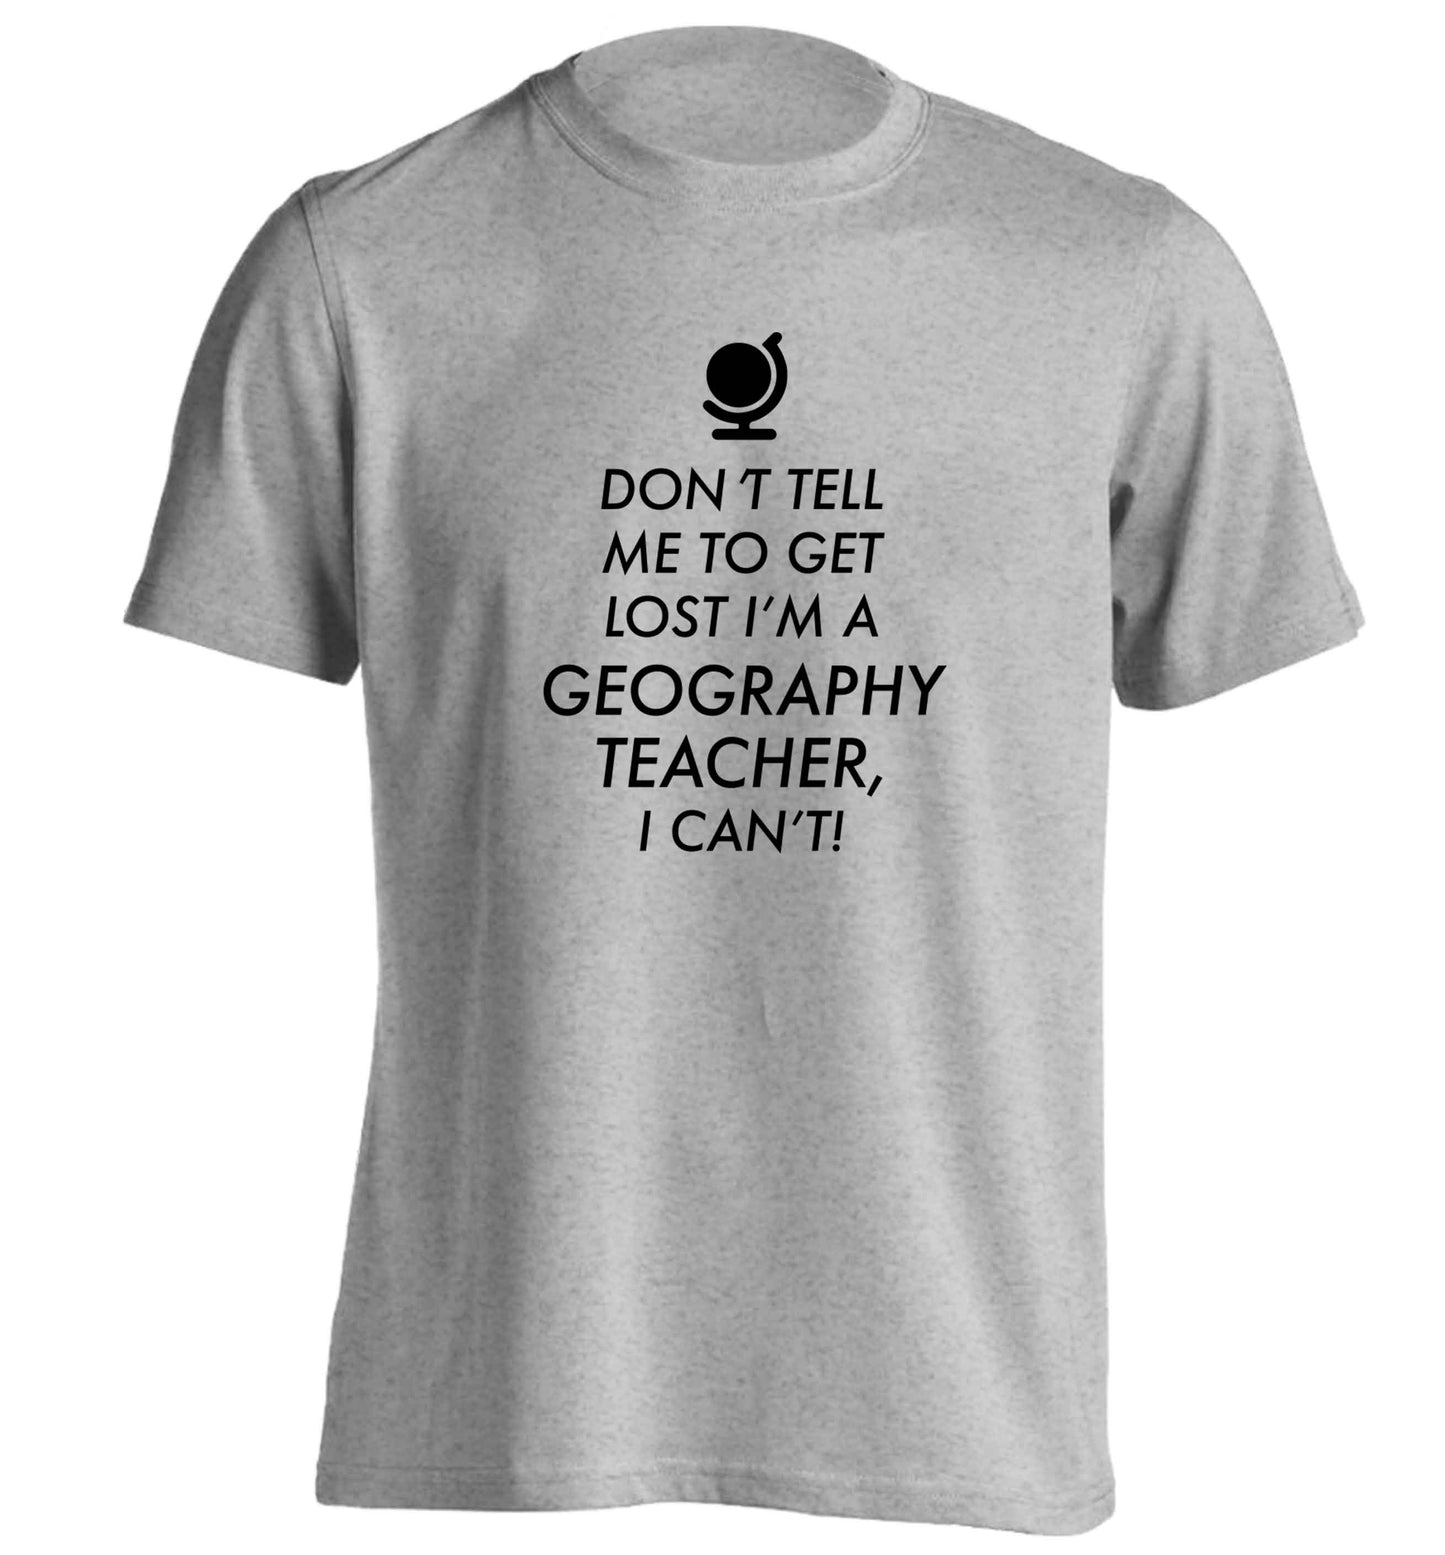 Don't tell me to get lost I'm a geography teacher, I can't adults unisex grey Tshirt 2XL